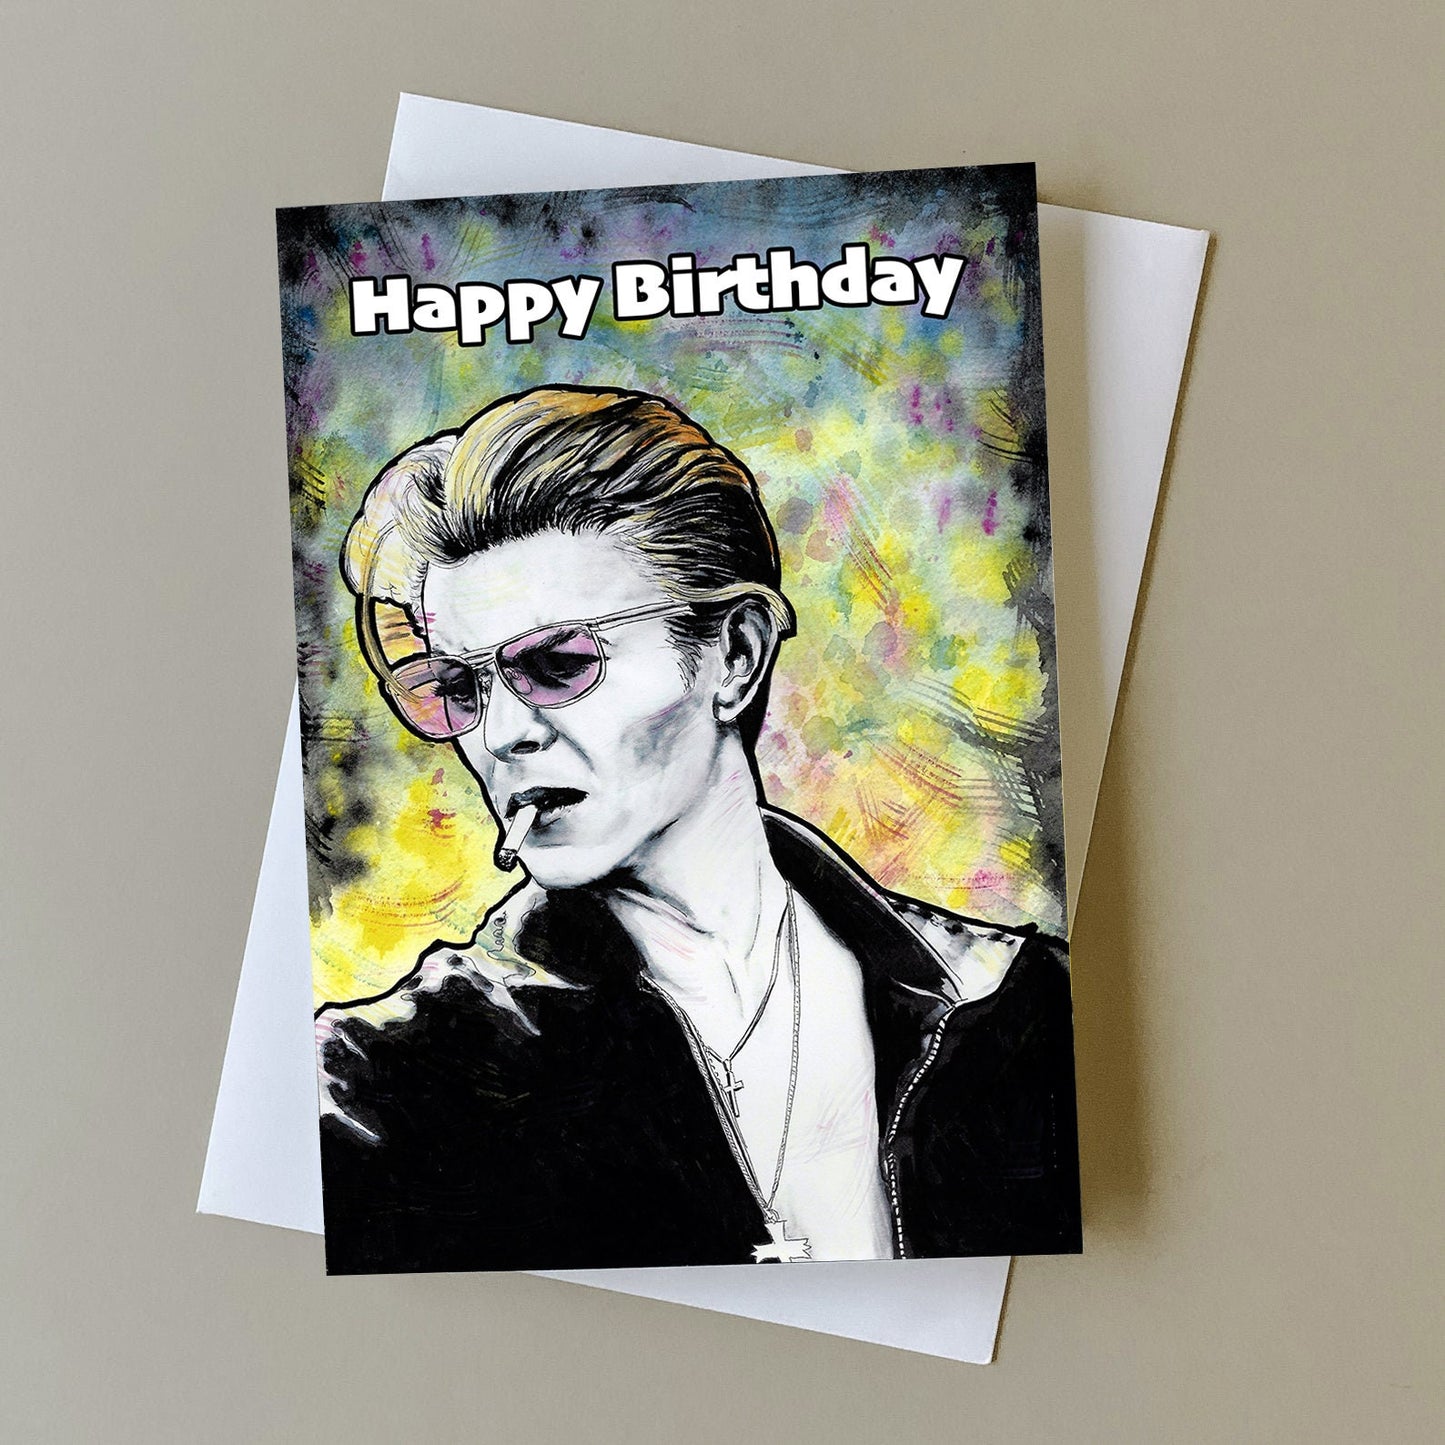 David Bowie birthday card, gift for David Bowie fan, greeting card for music fans, music birthday gift, personalised card, Bowie art card